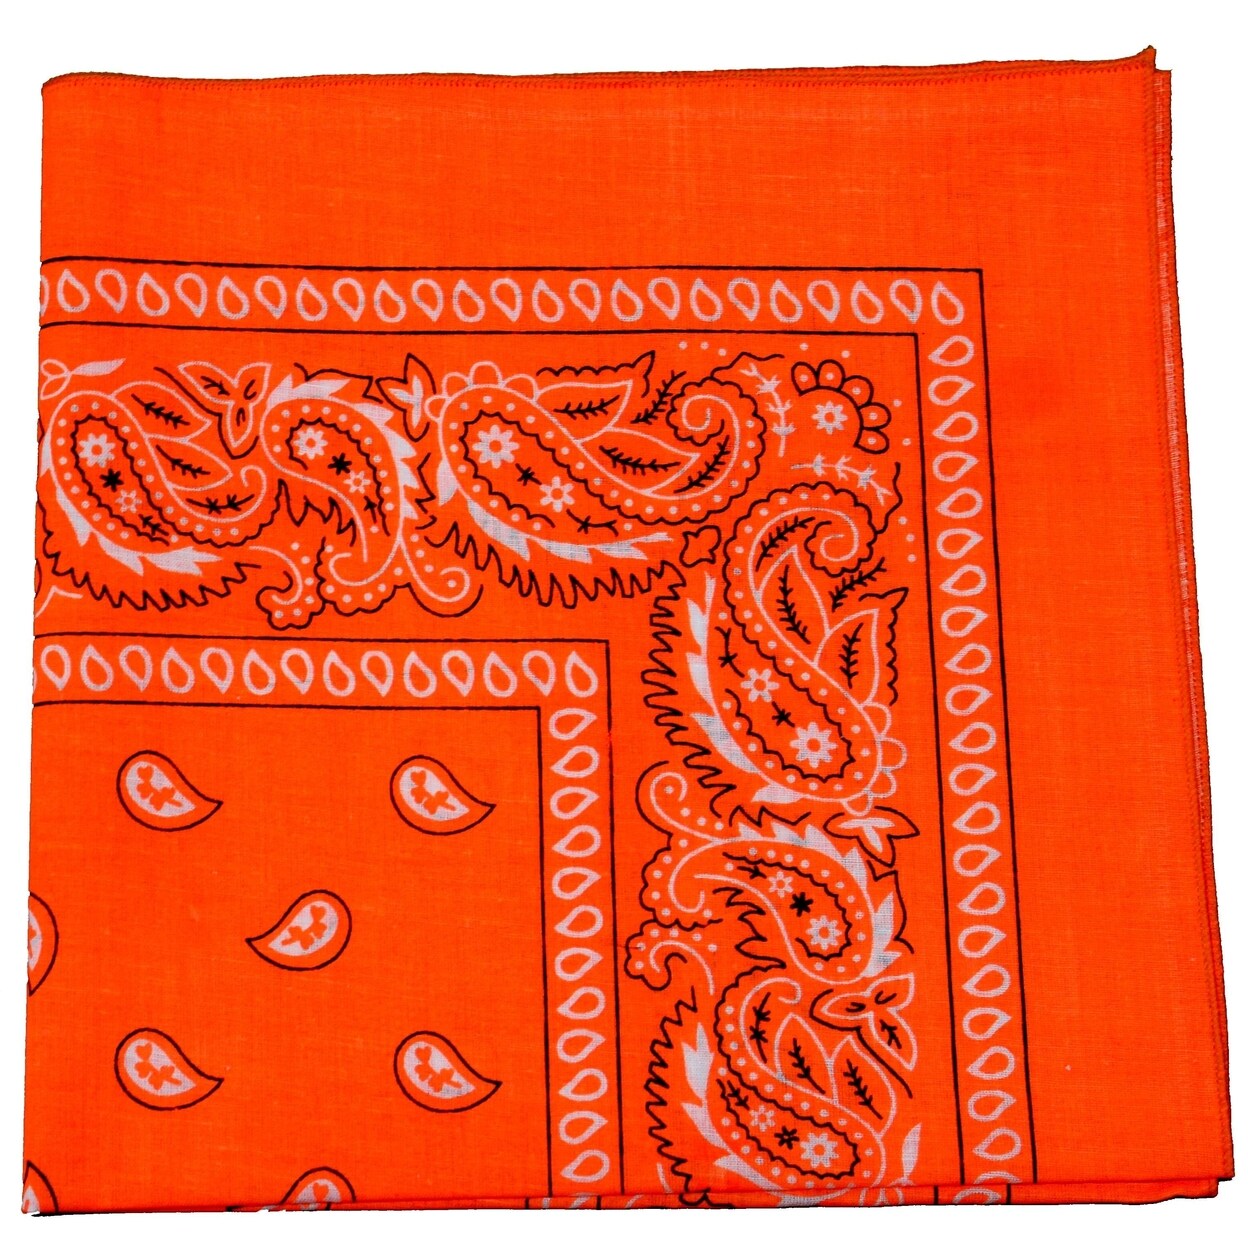 Qraftsy   Neon Colors Paisley Bandana - Cotton - Available in 1 Pack or 3 Pack